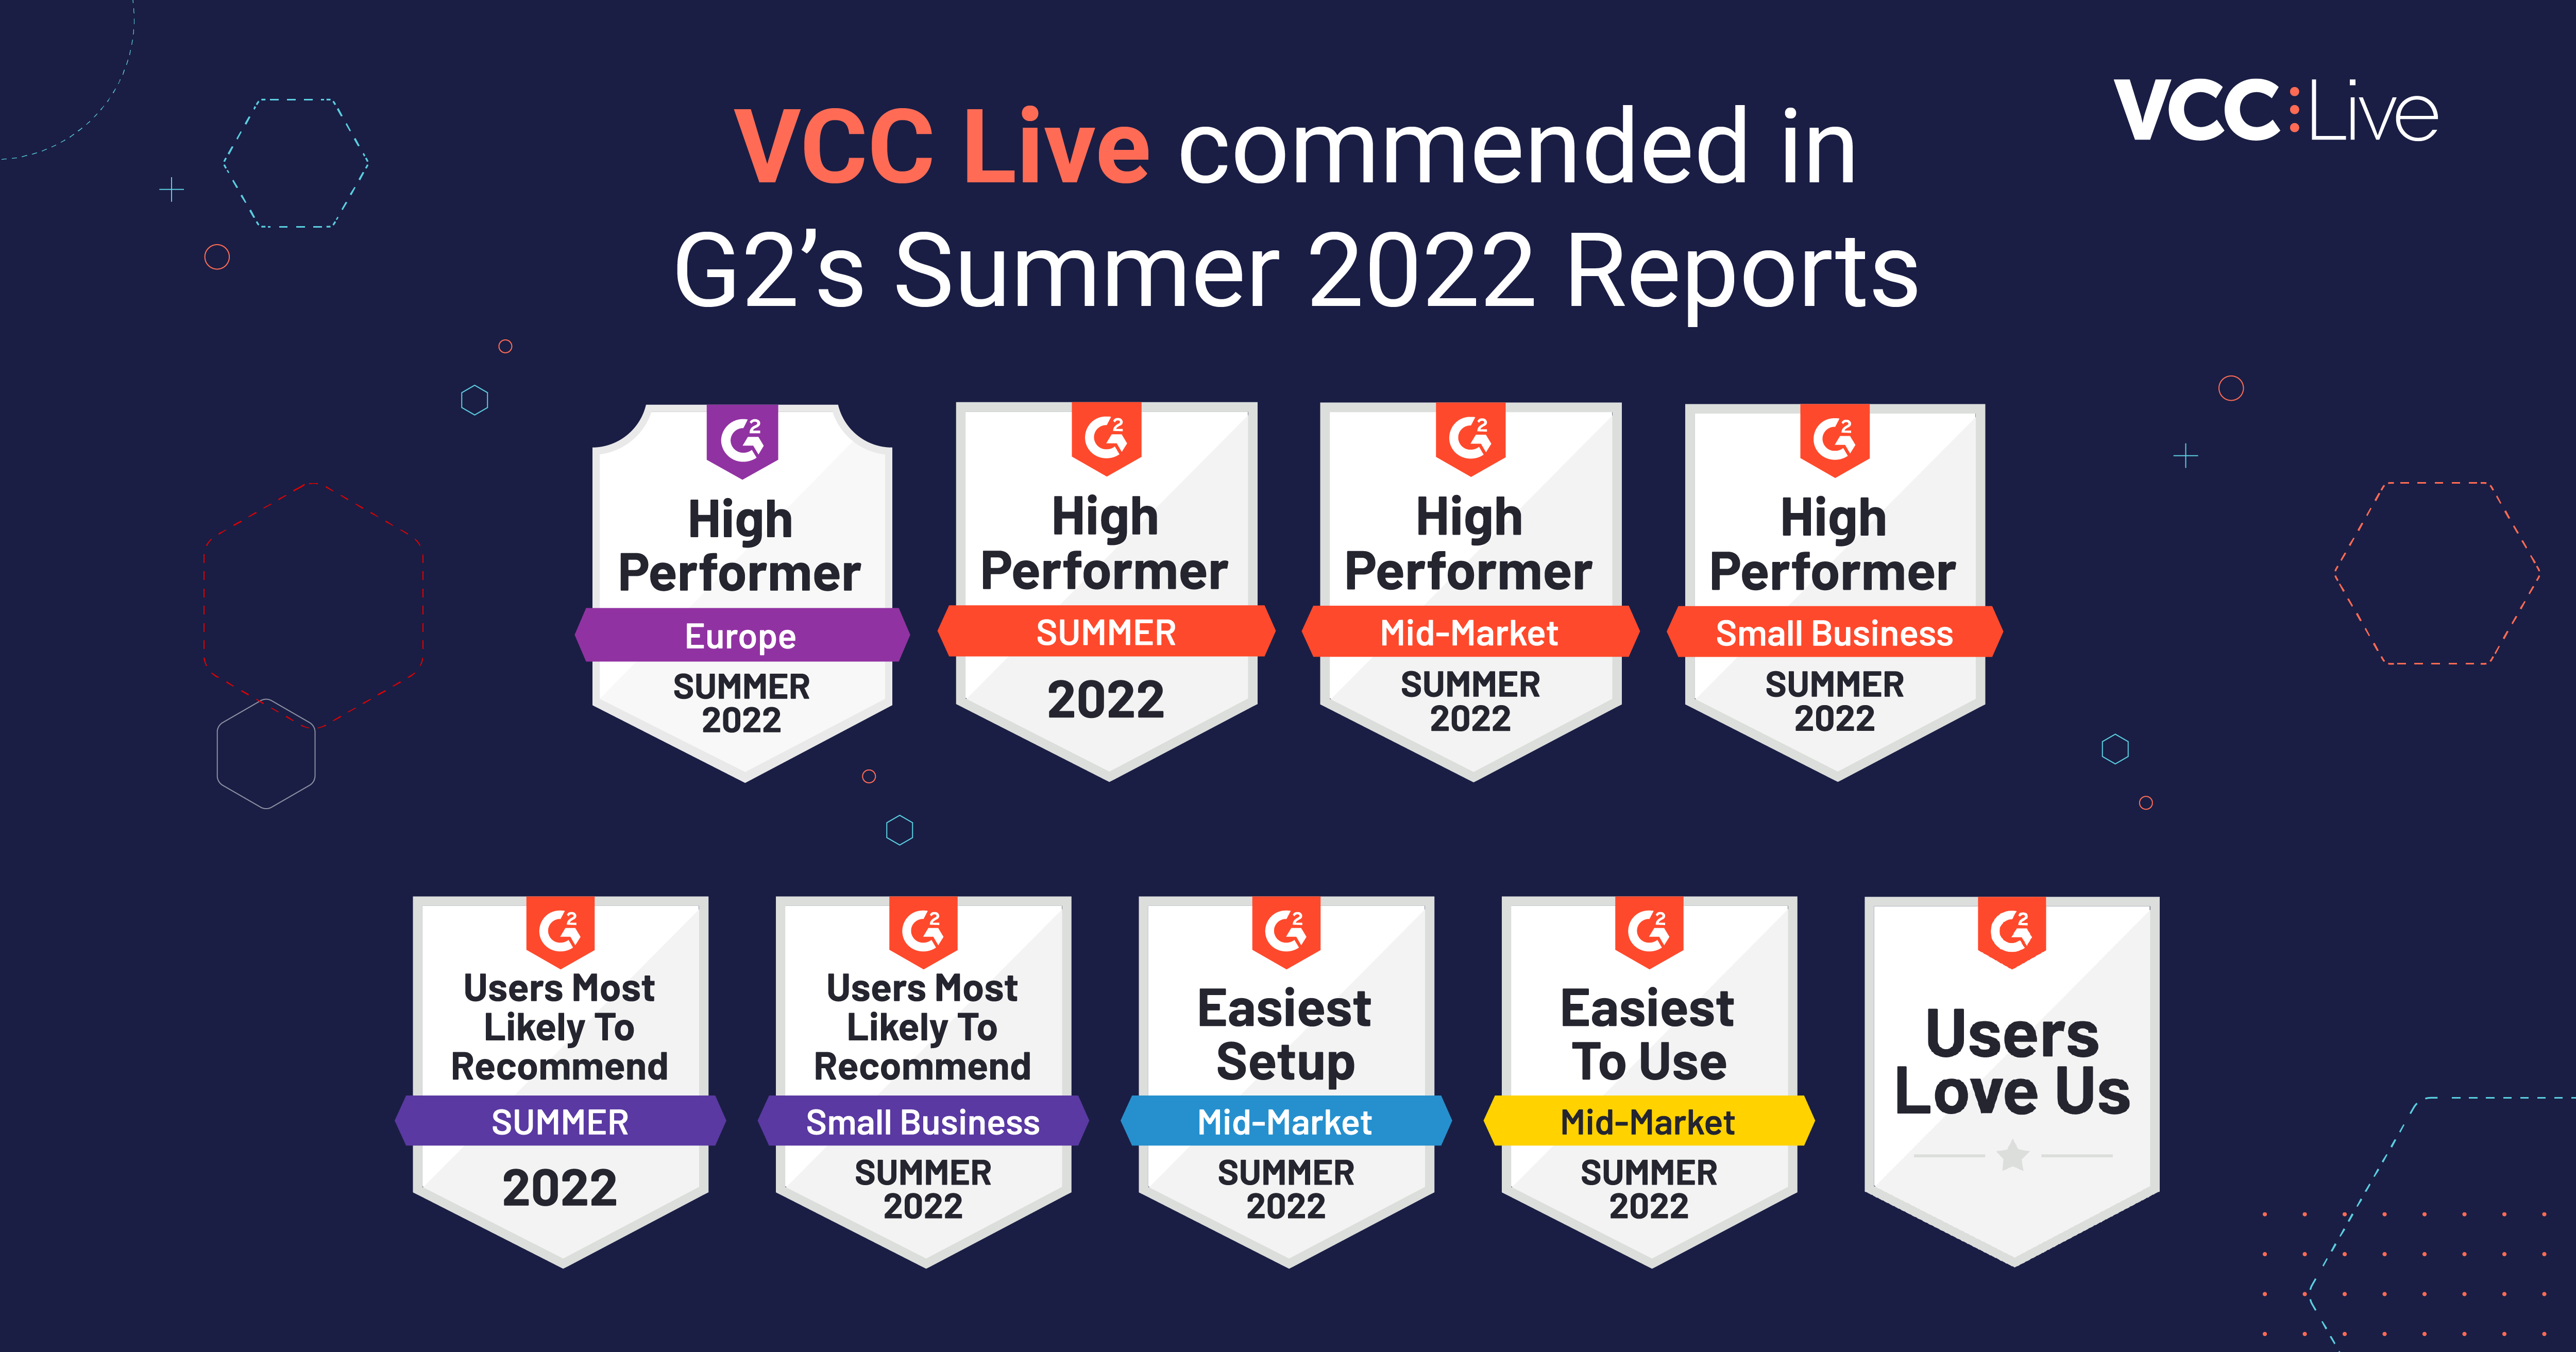 https://vcc.live/wp-content/uploads/2022/07/g2-badge-awards-summer-2022-vcc-live-thumbnail.png